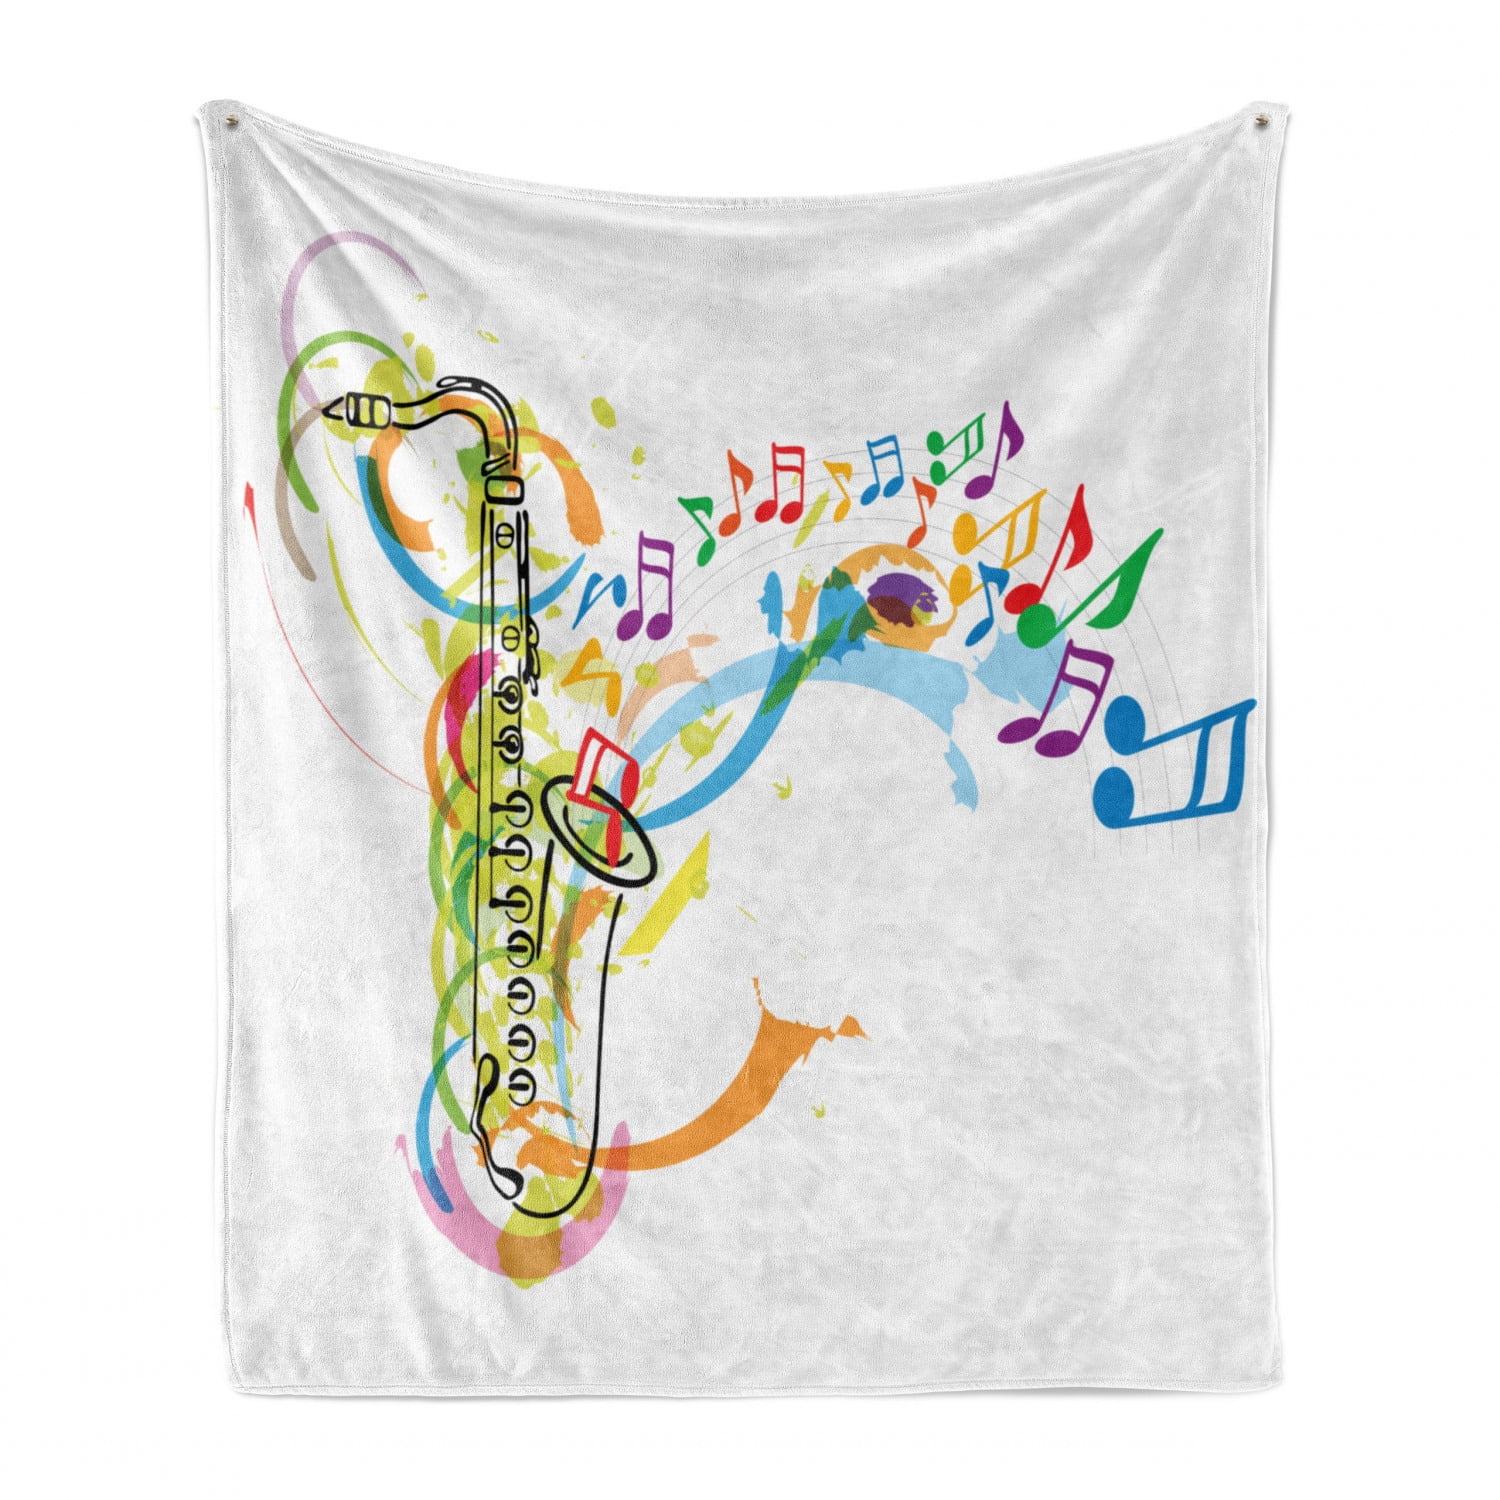 Colorful Music Notes Vibes from Saxophone Jazz Background Illustration Artwork Print Cozy Plush for Indoor and Outdoor Use Ambesonne Music Soft Flannel Fleece Throw Blanket 50 x 60 Multicolor 